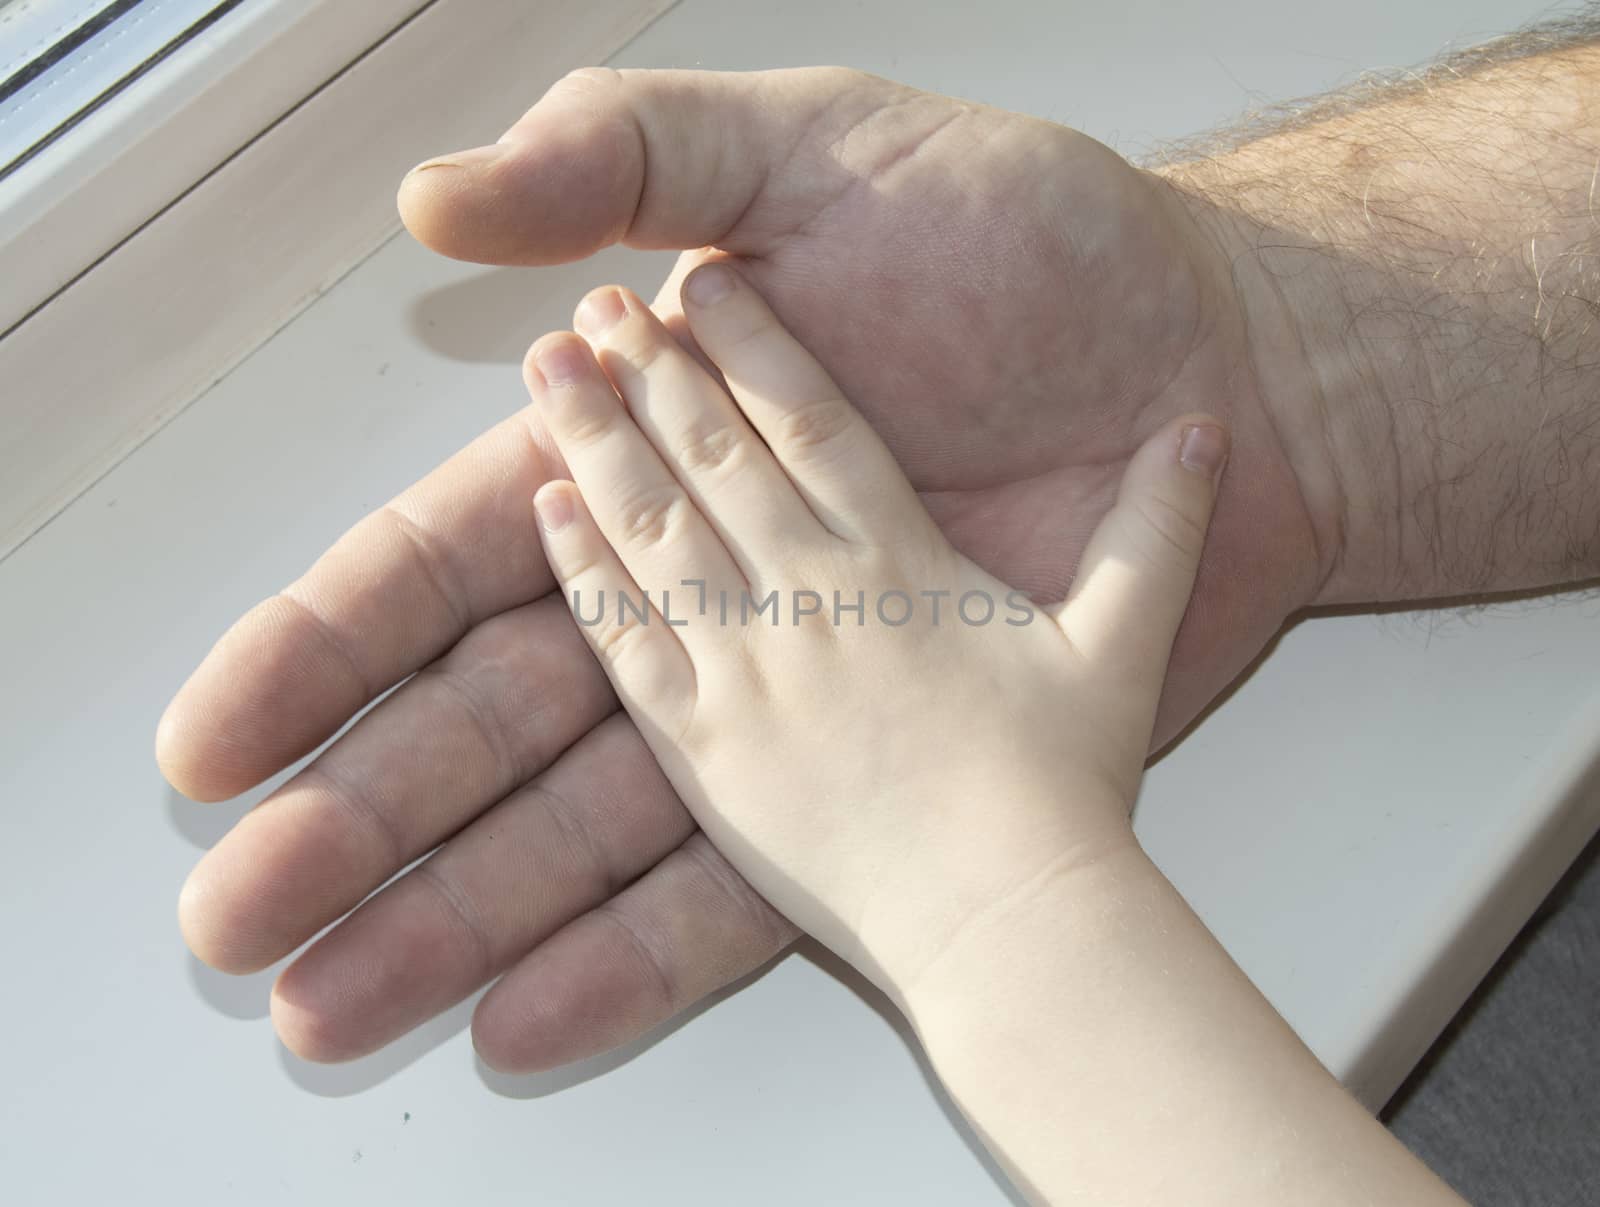 The father carefully holding in his hand the hand of a child. Happy family, care and love, father's day.